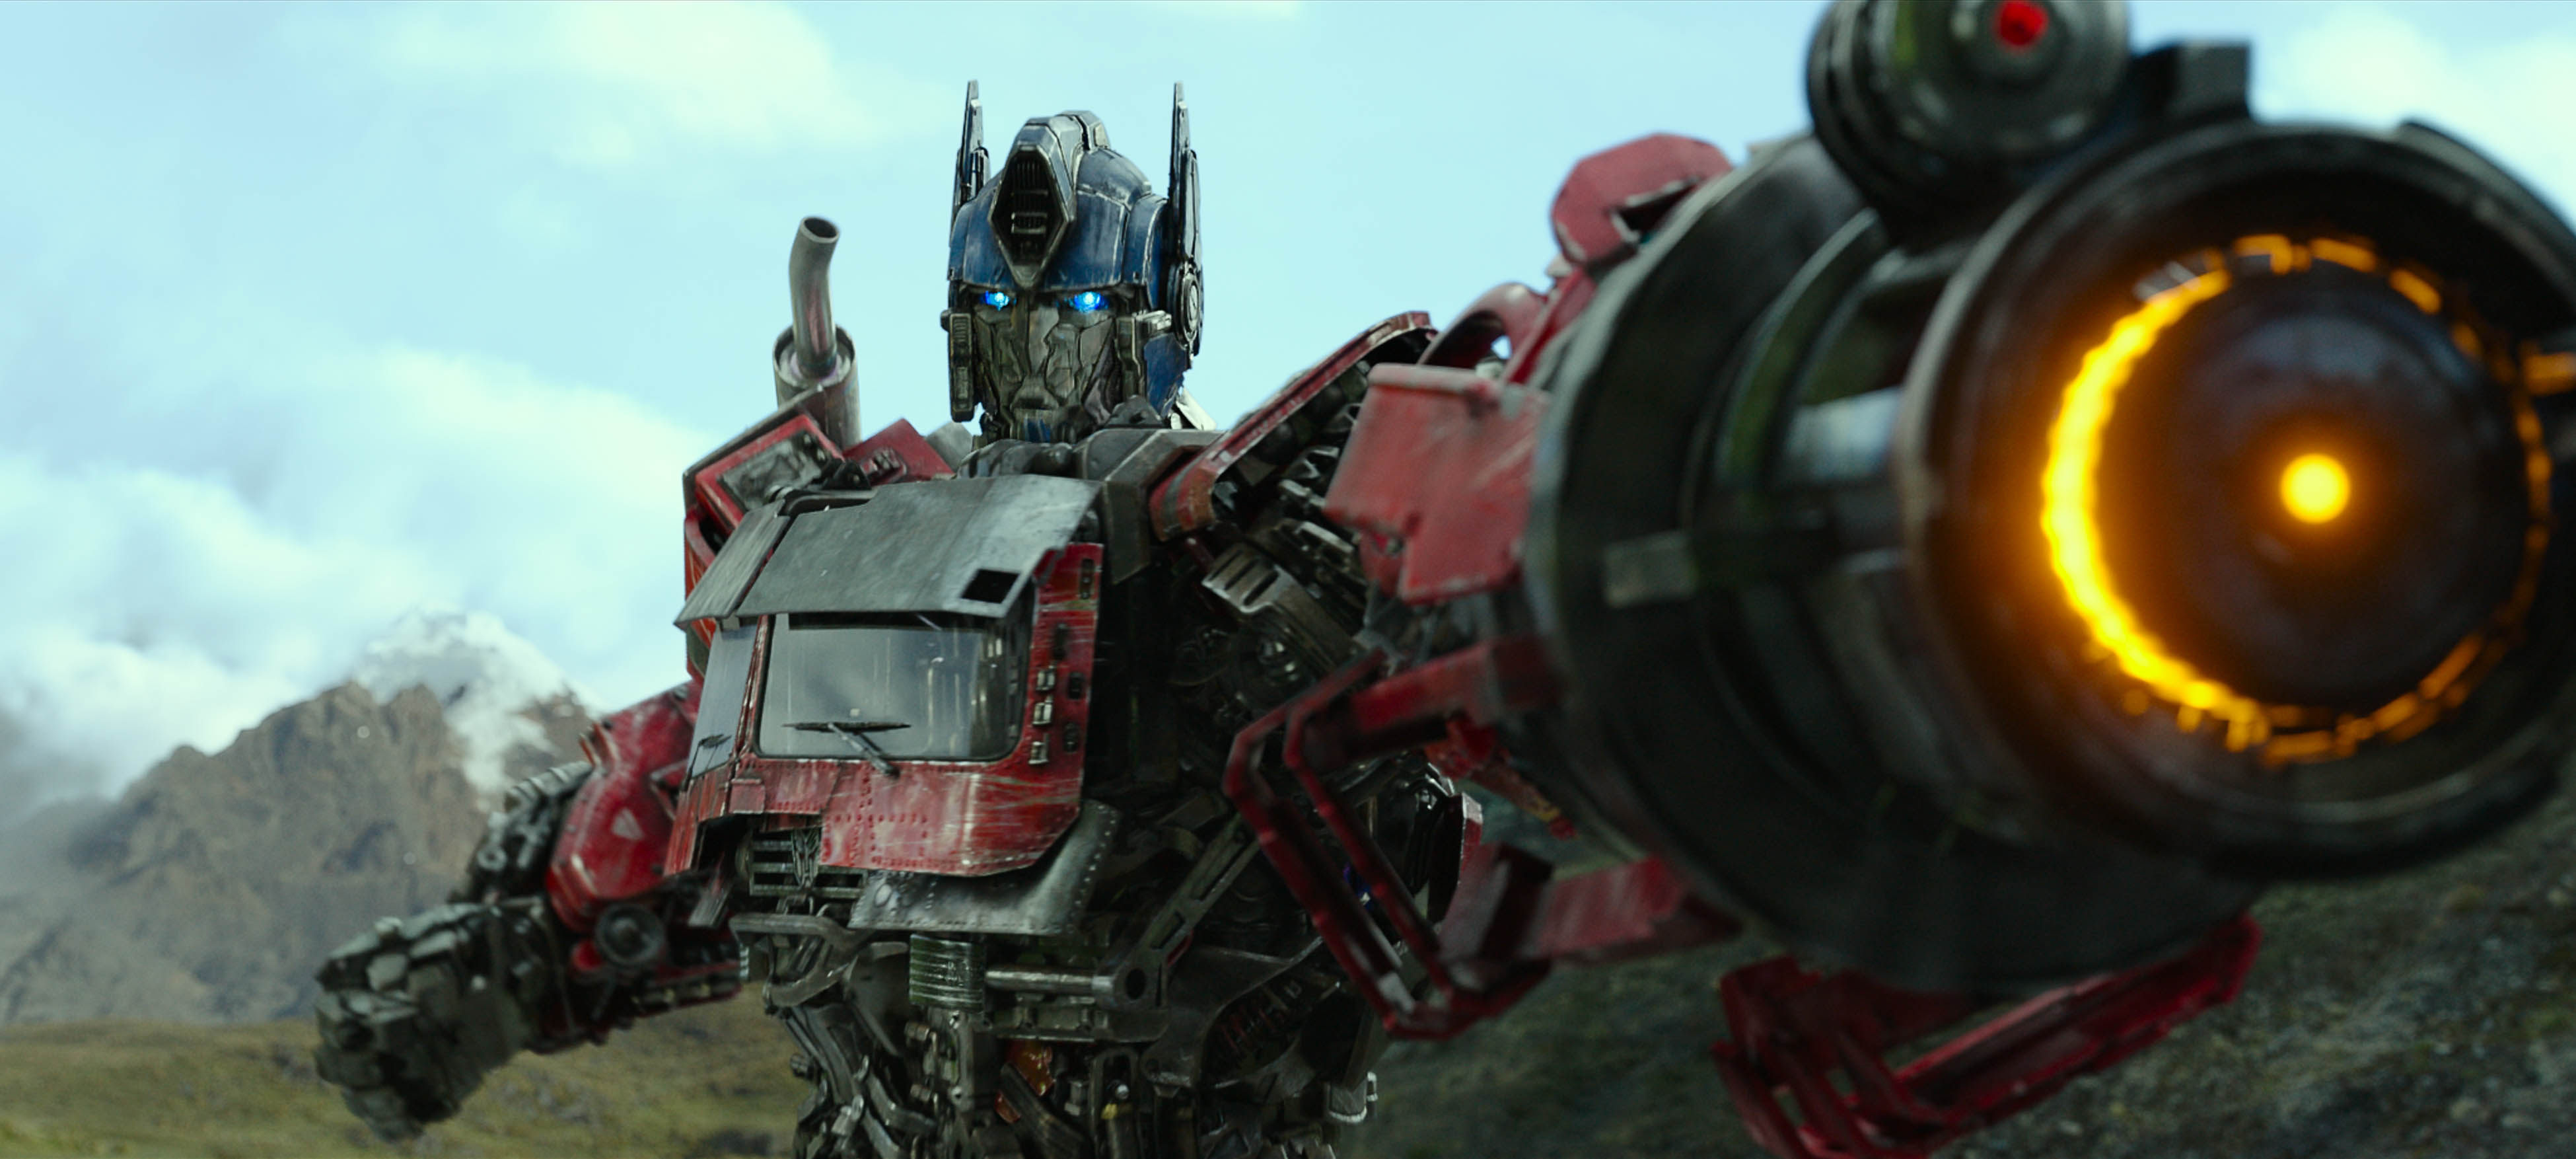 Optimus Prime, voiced by Peter Cullen, in a still from “Transformers: Rise of the Beasts” (category IIA), directed by Steven Caple Jr. Anthony Ramos and Michelle Yeoh co-star.